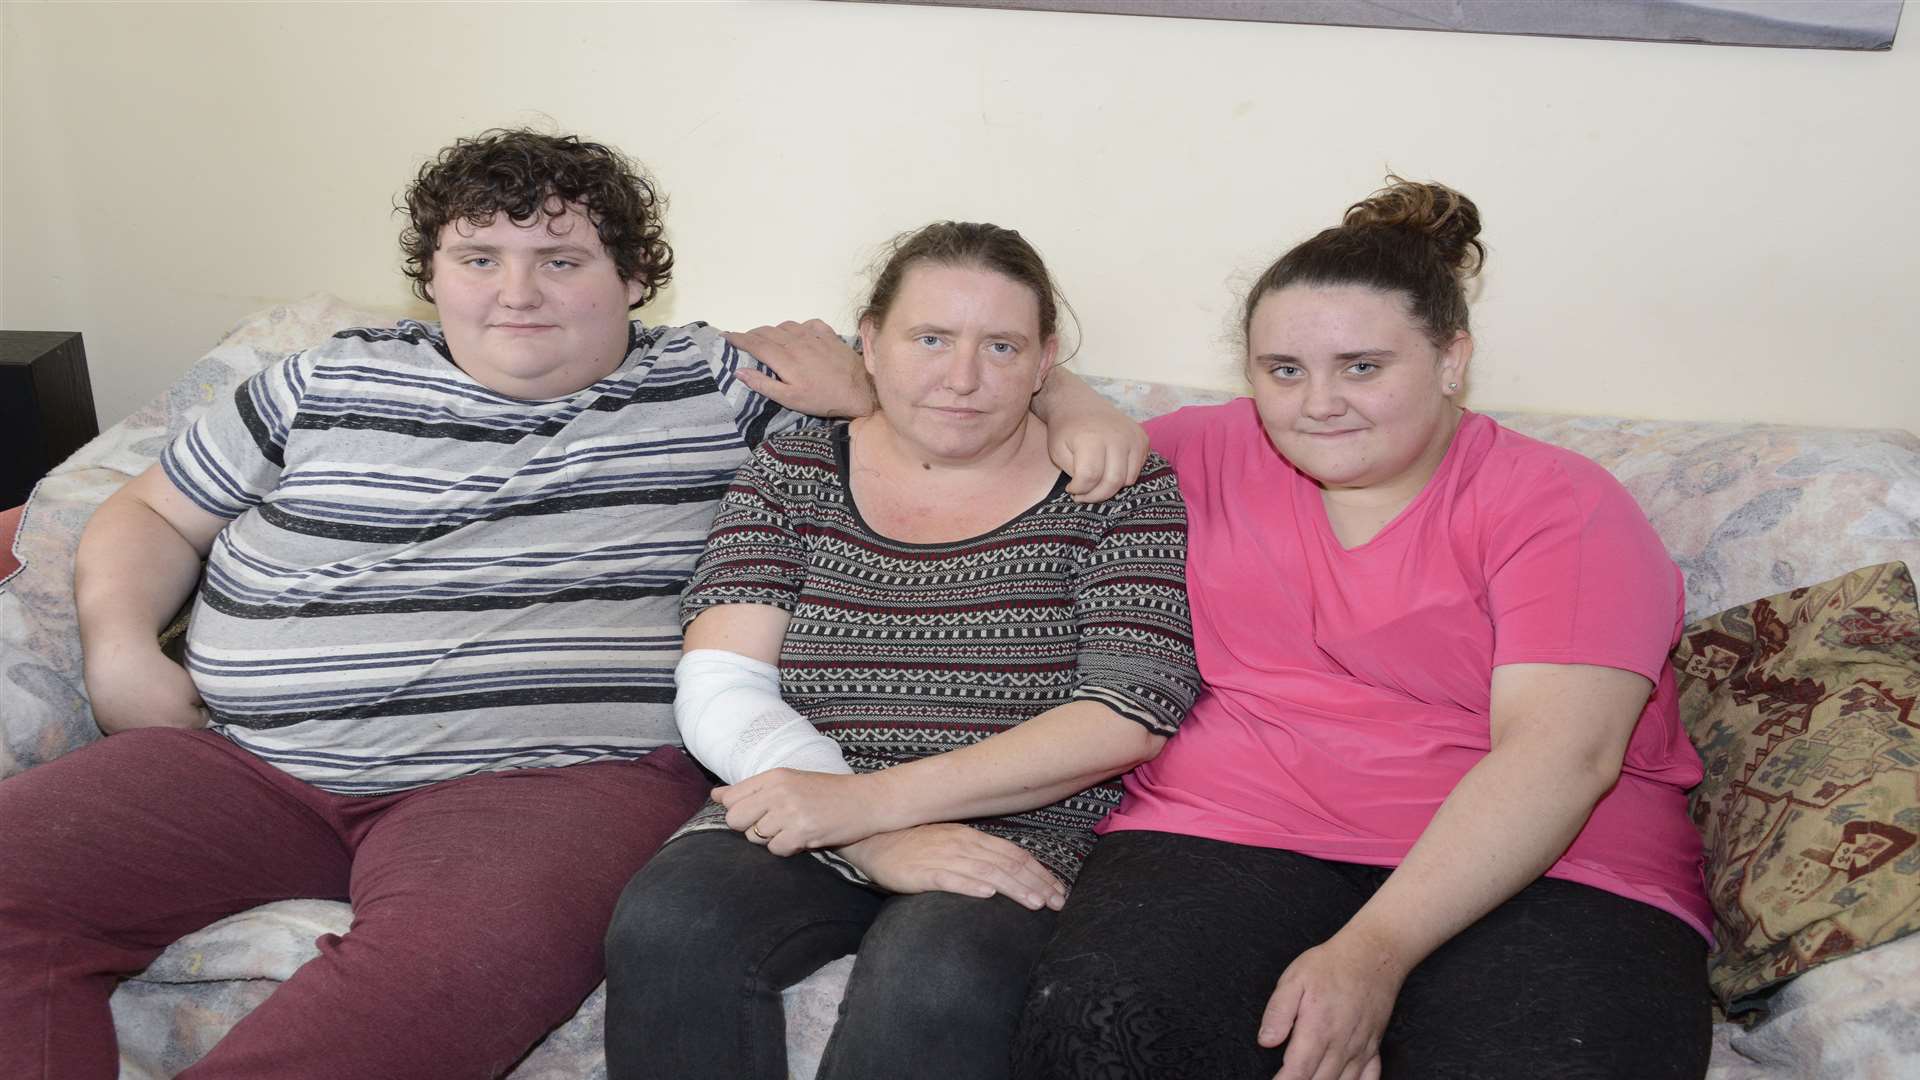 Mary Homewood and children Ethan, 15, and Amber, 12 survived an M20 accident last week